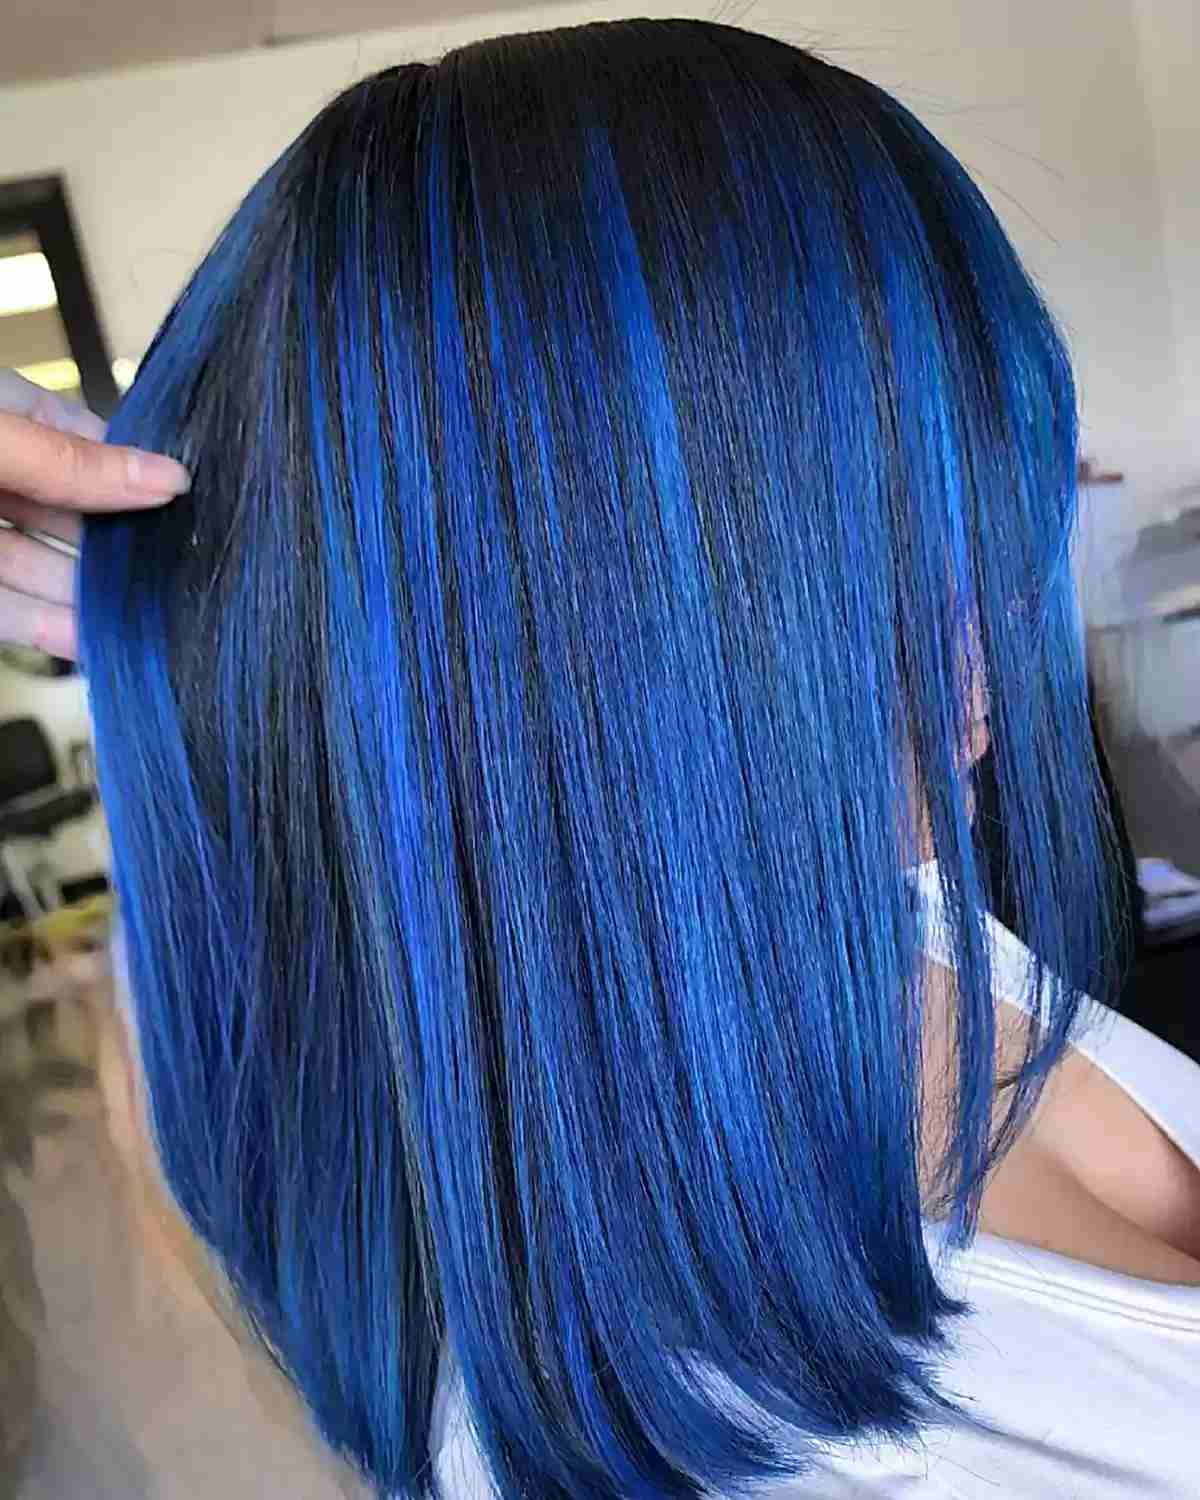 Low-Maintenance Rich Blue Balayage Highlights on Dark Roots for Mid-Length Hair